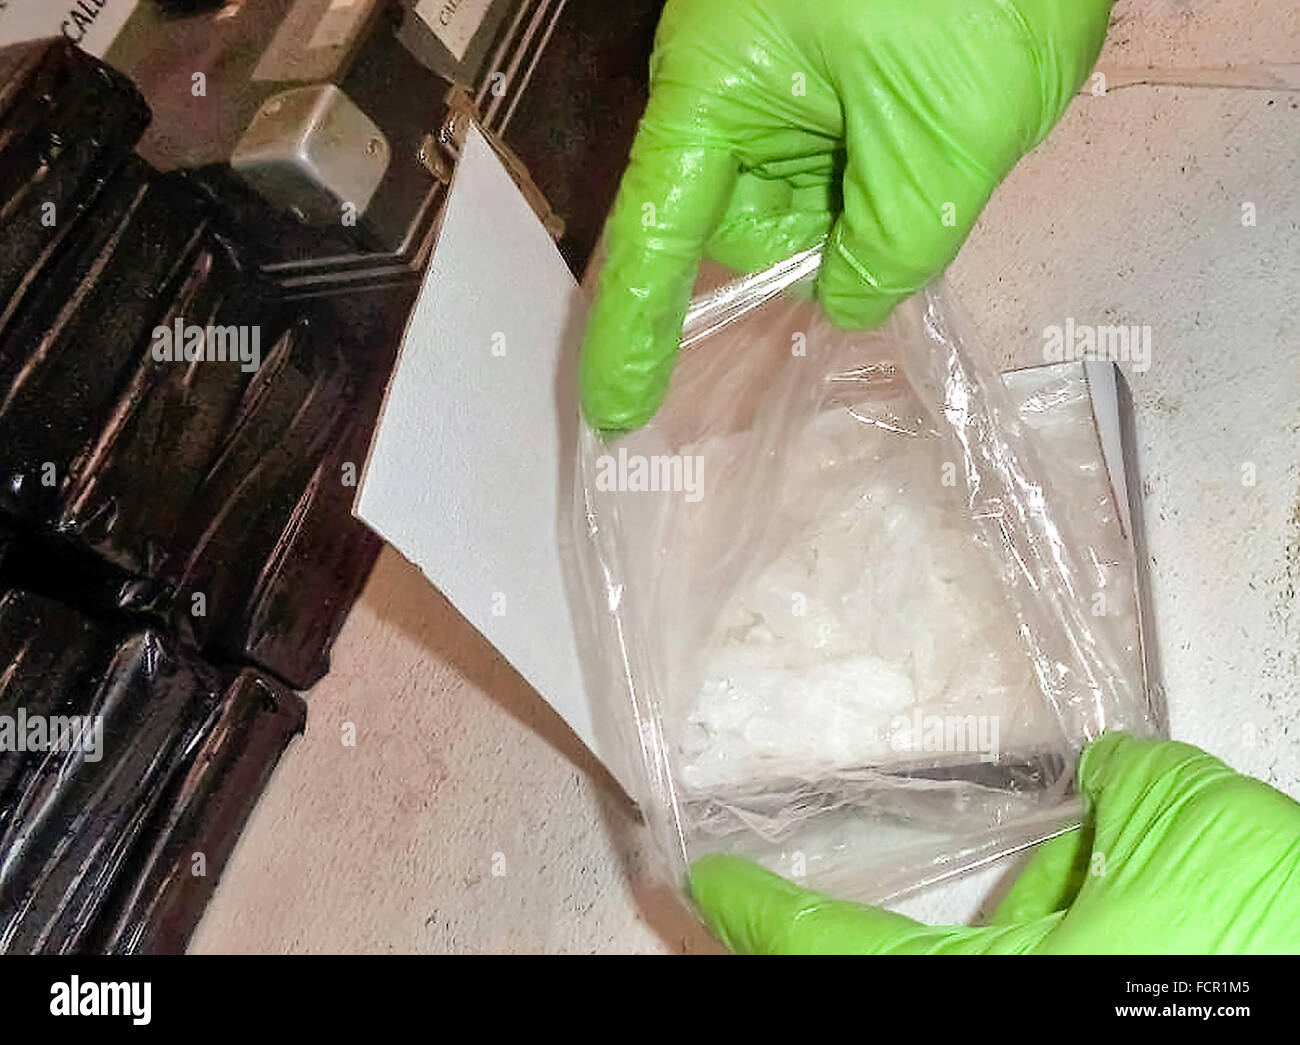 U.S. Customs and Border Protection officers at the Port of San Luis inspect over 8 Kg (19 pounds) of crystal methamphetamine with a street value of USD67,000 found hidden in a rear bumper at the Nogales-Grand Avenue (DeConcini) Border Inspection Station . See description for more information. Stock Photo